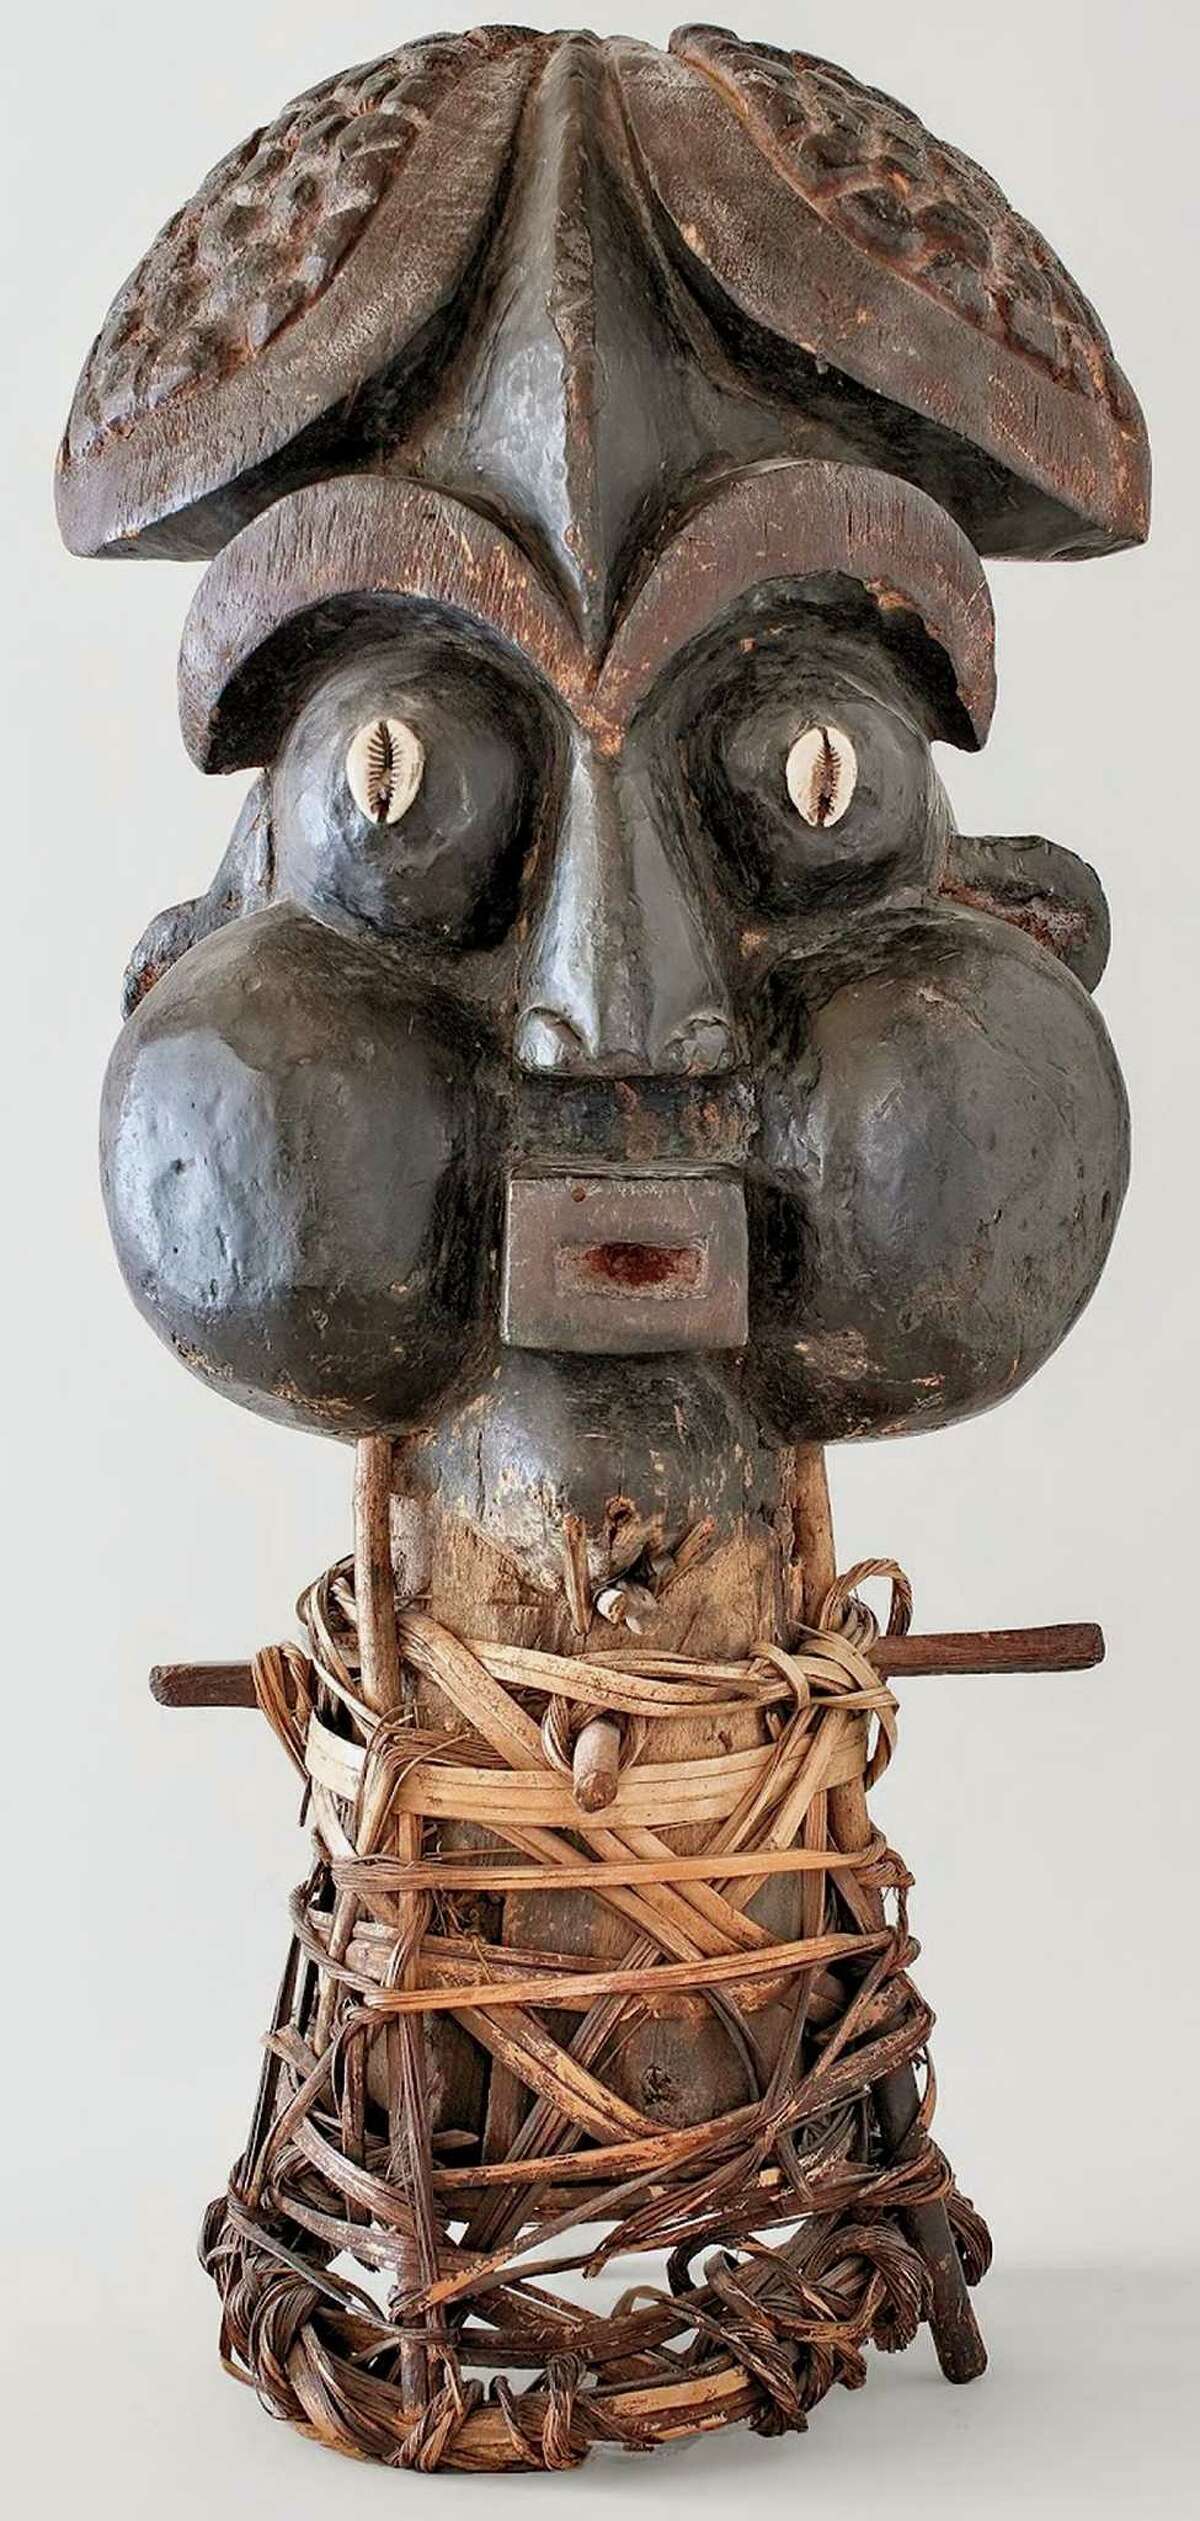 A 20th century Bamum mask from Cameroon, wood, cowries, cane and pigment, at the de Young.